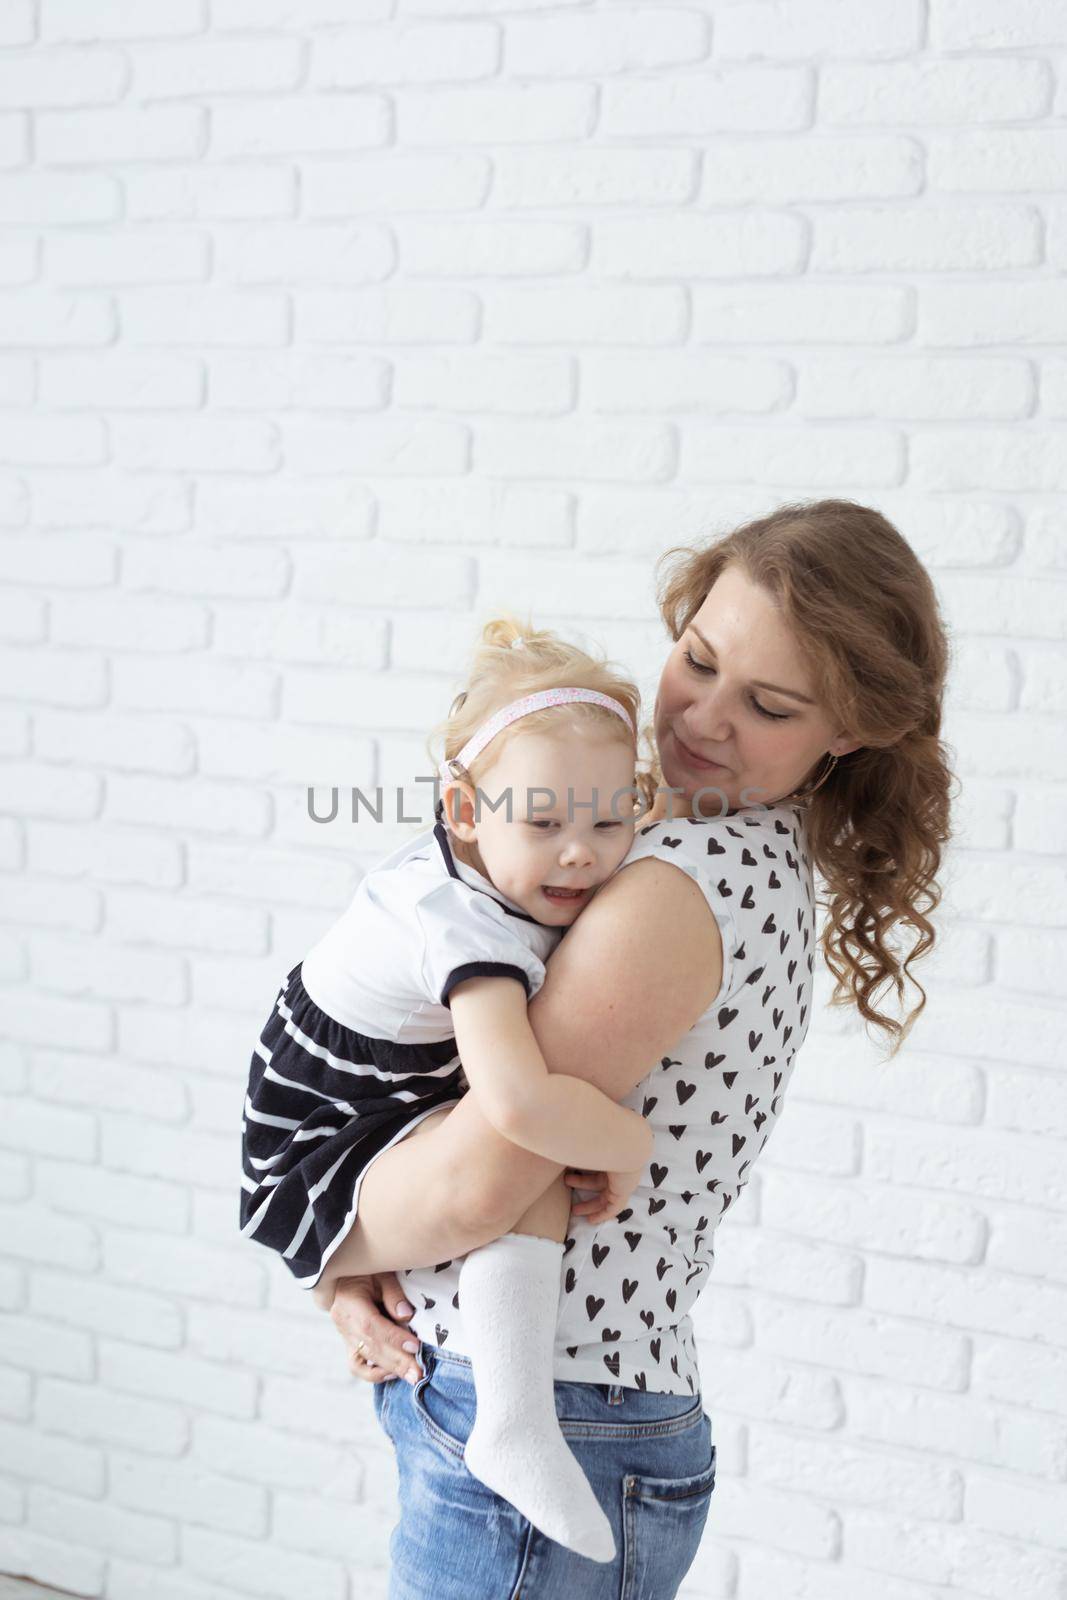 Baby with cochlear implant hearing aid having fun with her mother - deafness and diversity concept. Copy space place for advertising